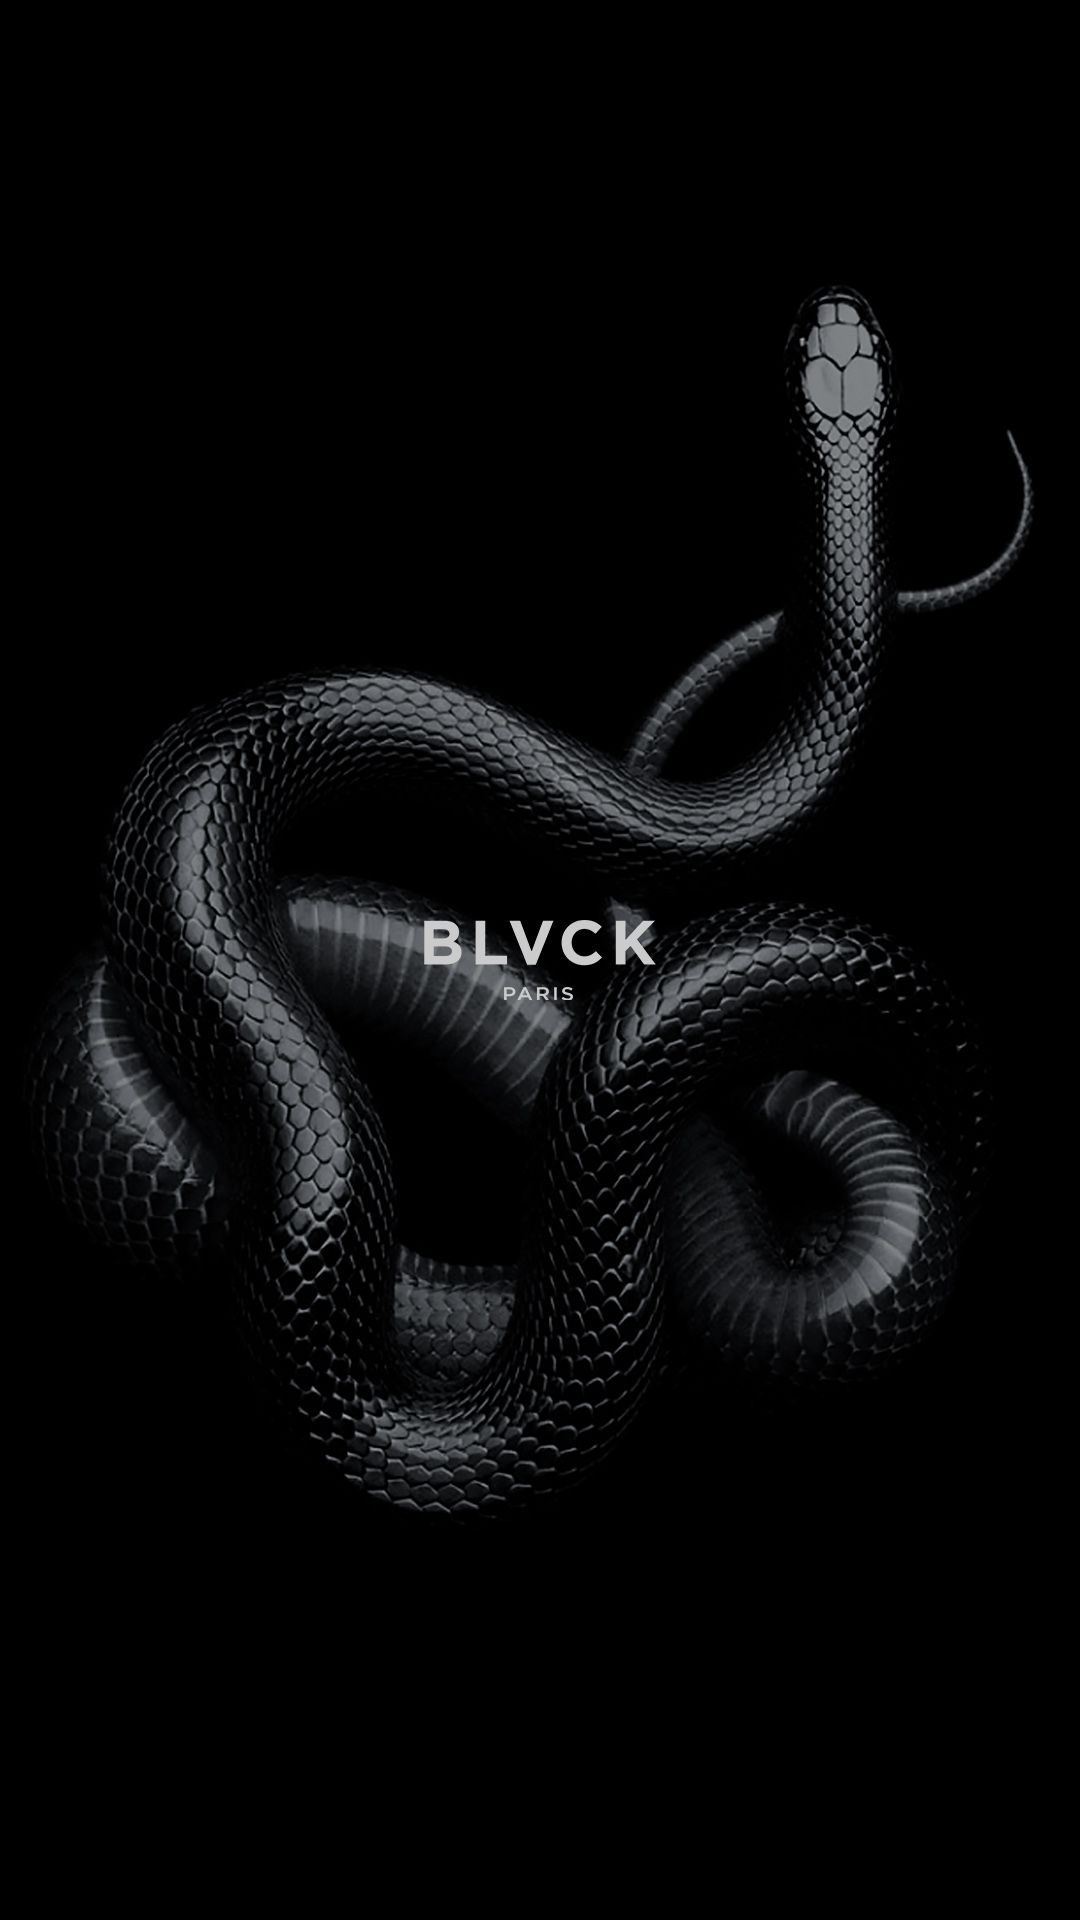 3Wallpapers for iPhone on Twitter iPhone Wallpaper Snakes  snakes   Download in HD gt httpstcoRWJIsIlOUn httpstcoFOeET9ys8f  X